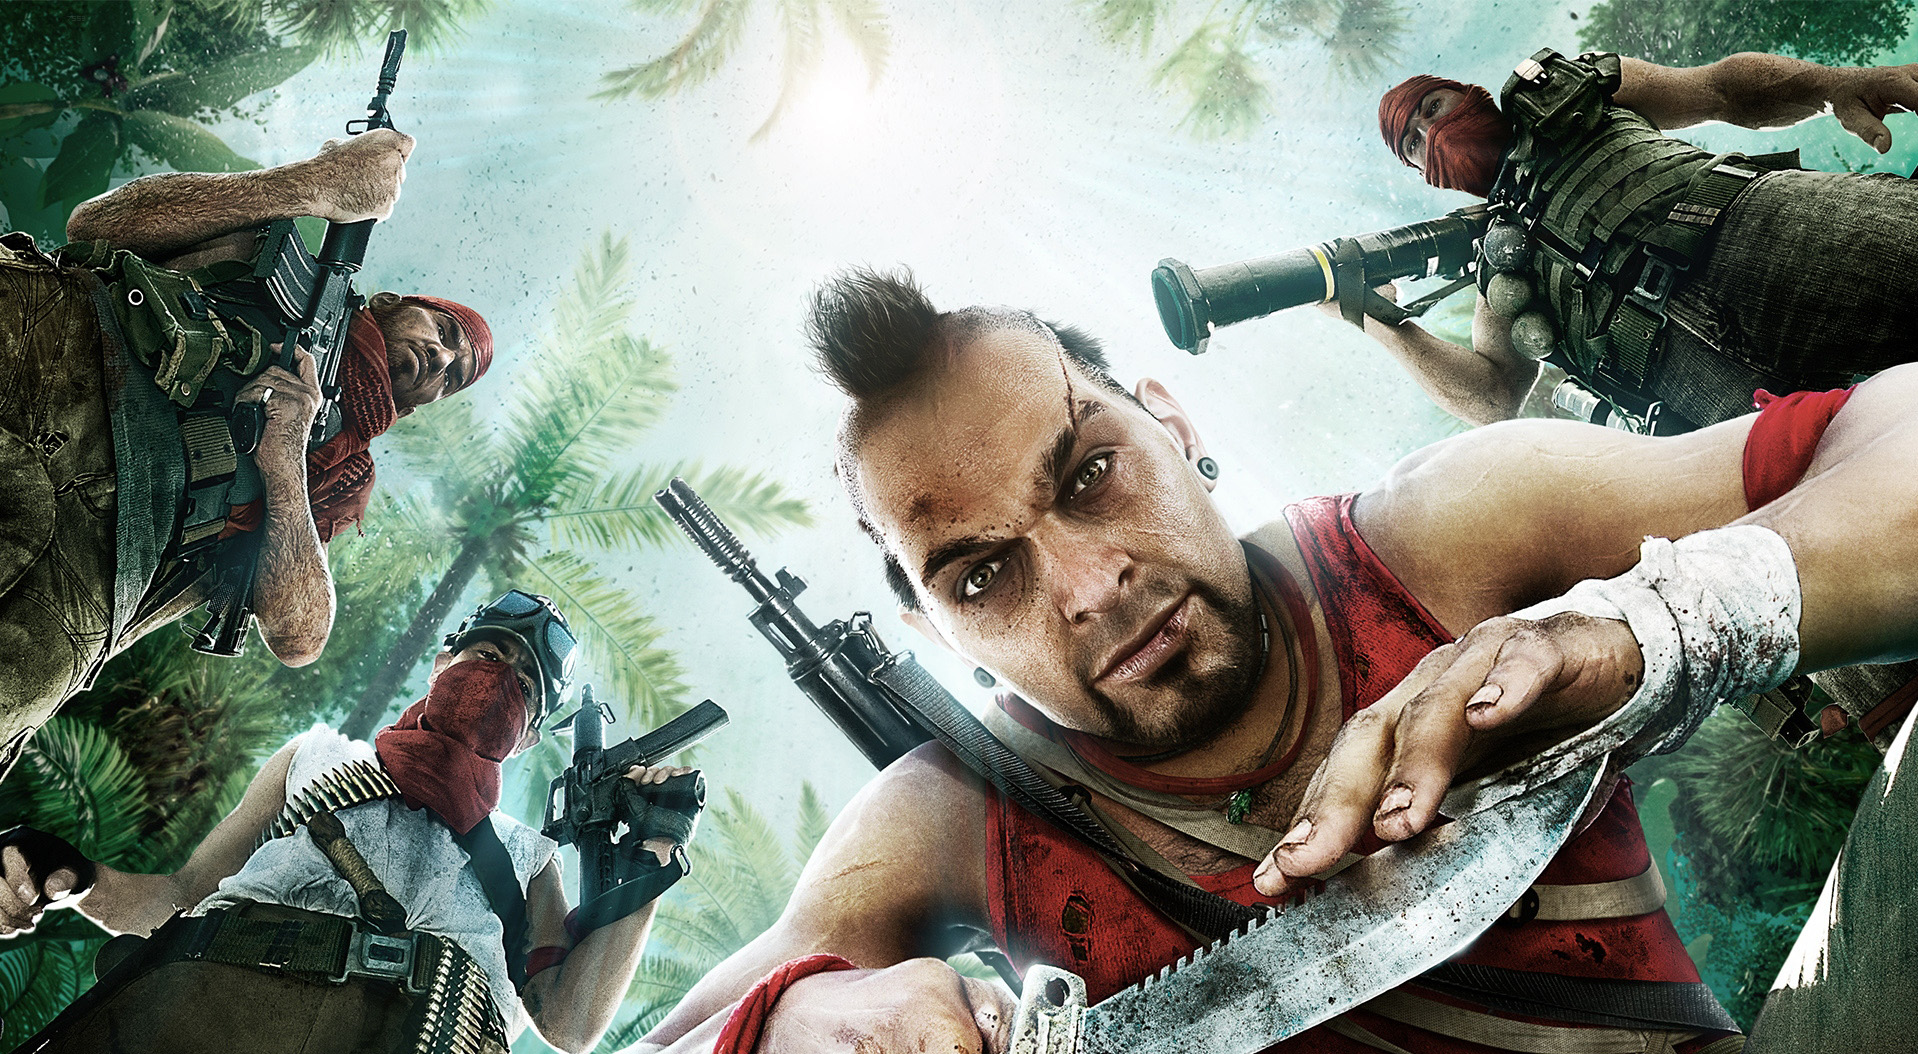 Composer may have Inadvertently Announced Far Cry 4 - Cliff Martinez reveals he’s composing soundtrack for Ubisoft’s next instalment